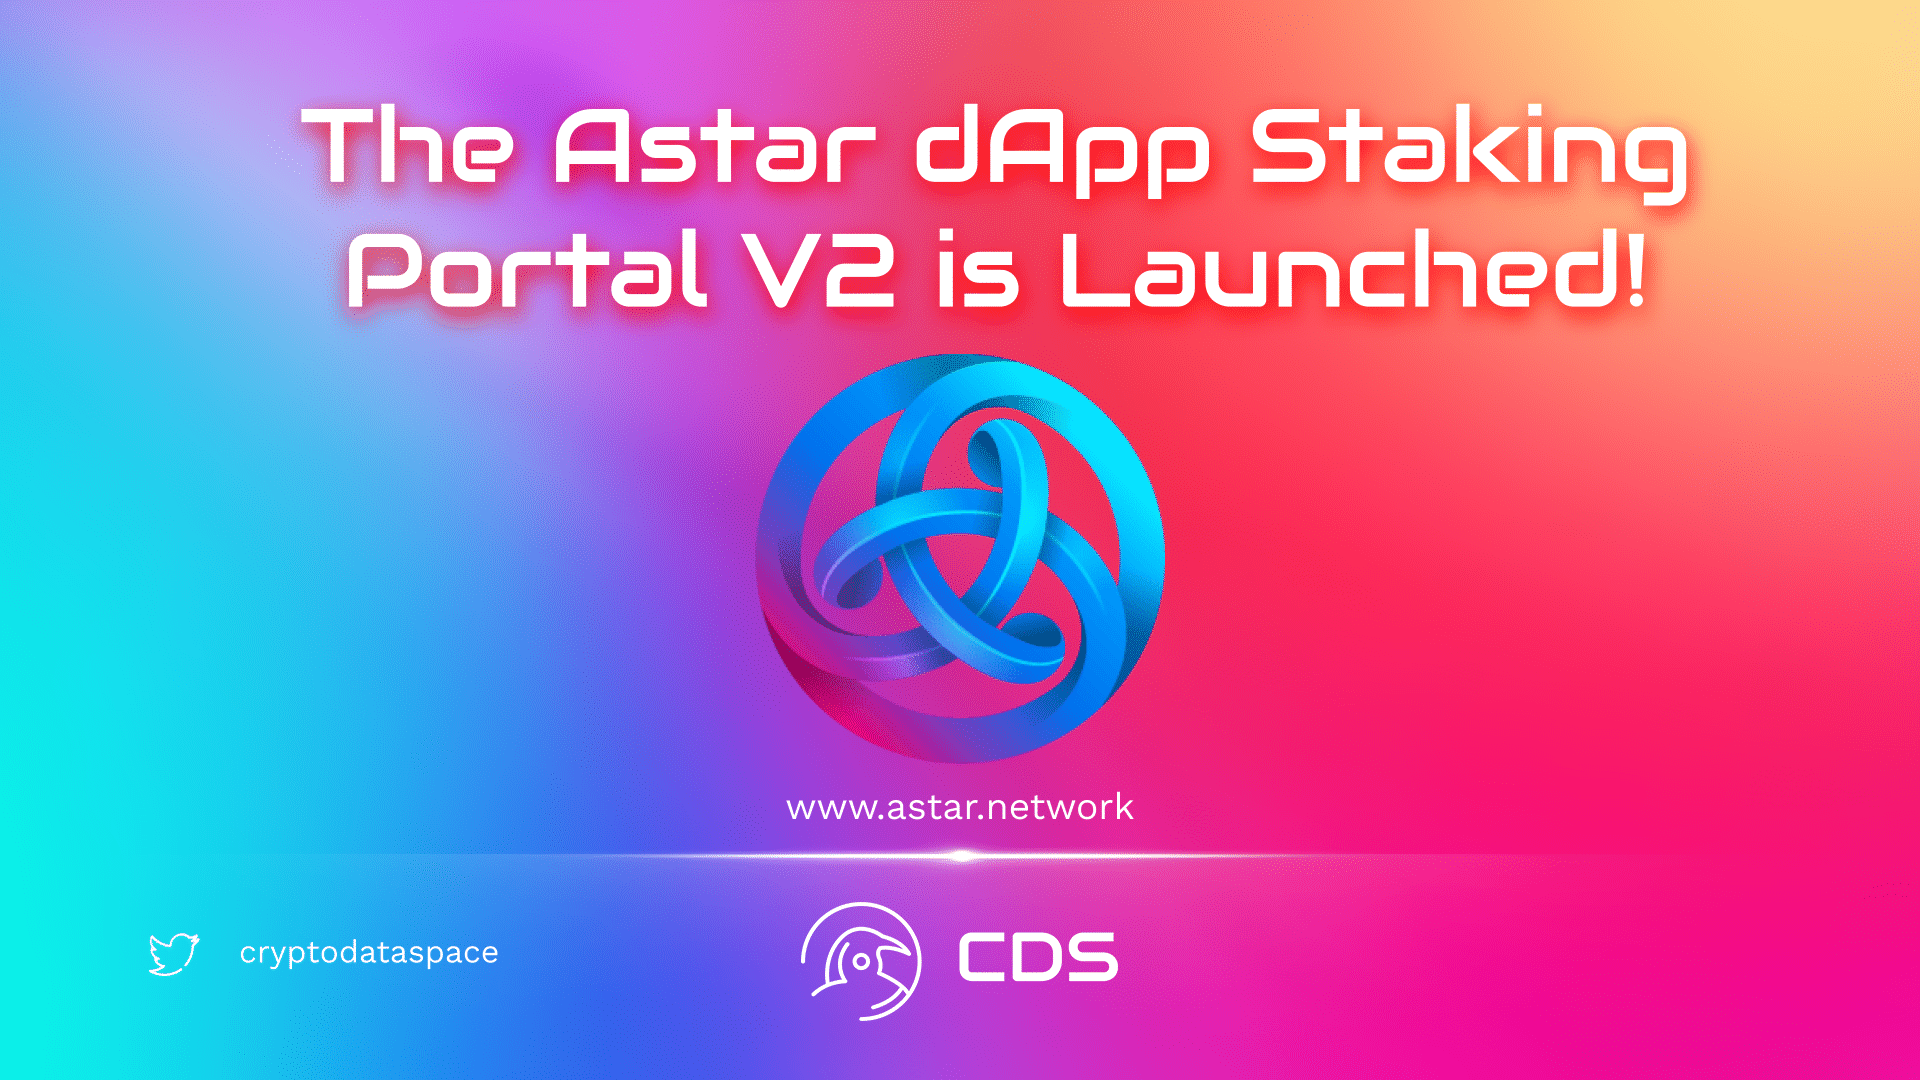 The Astar dApp Staking Portal V2 is Launched!